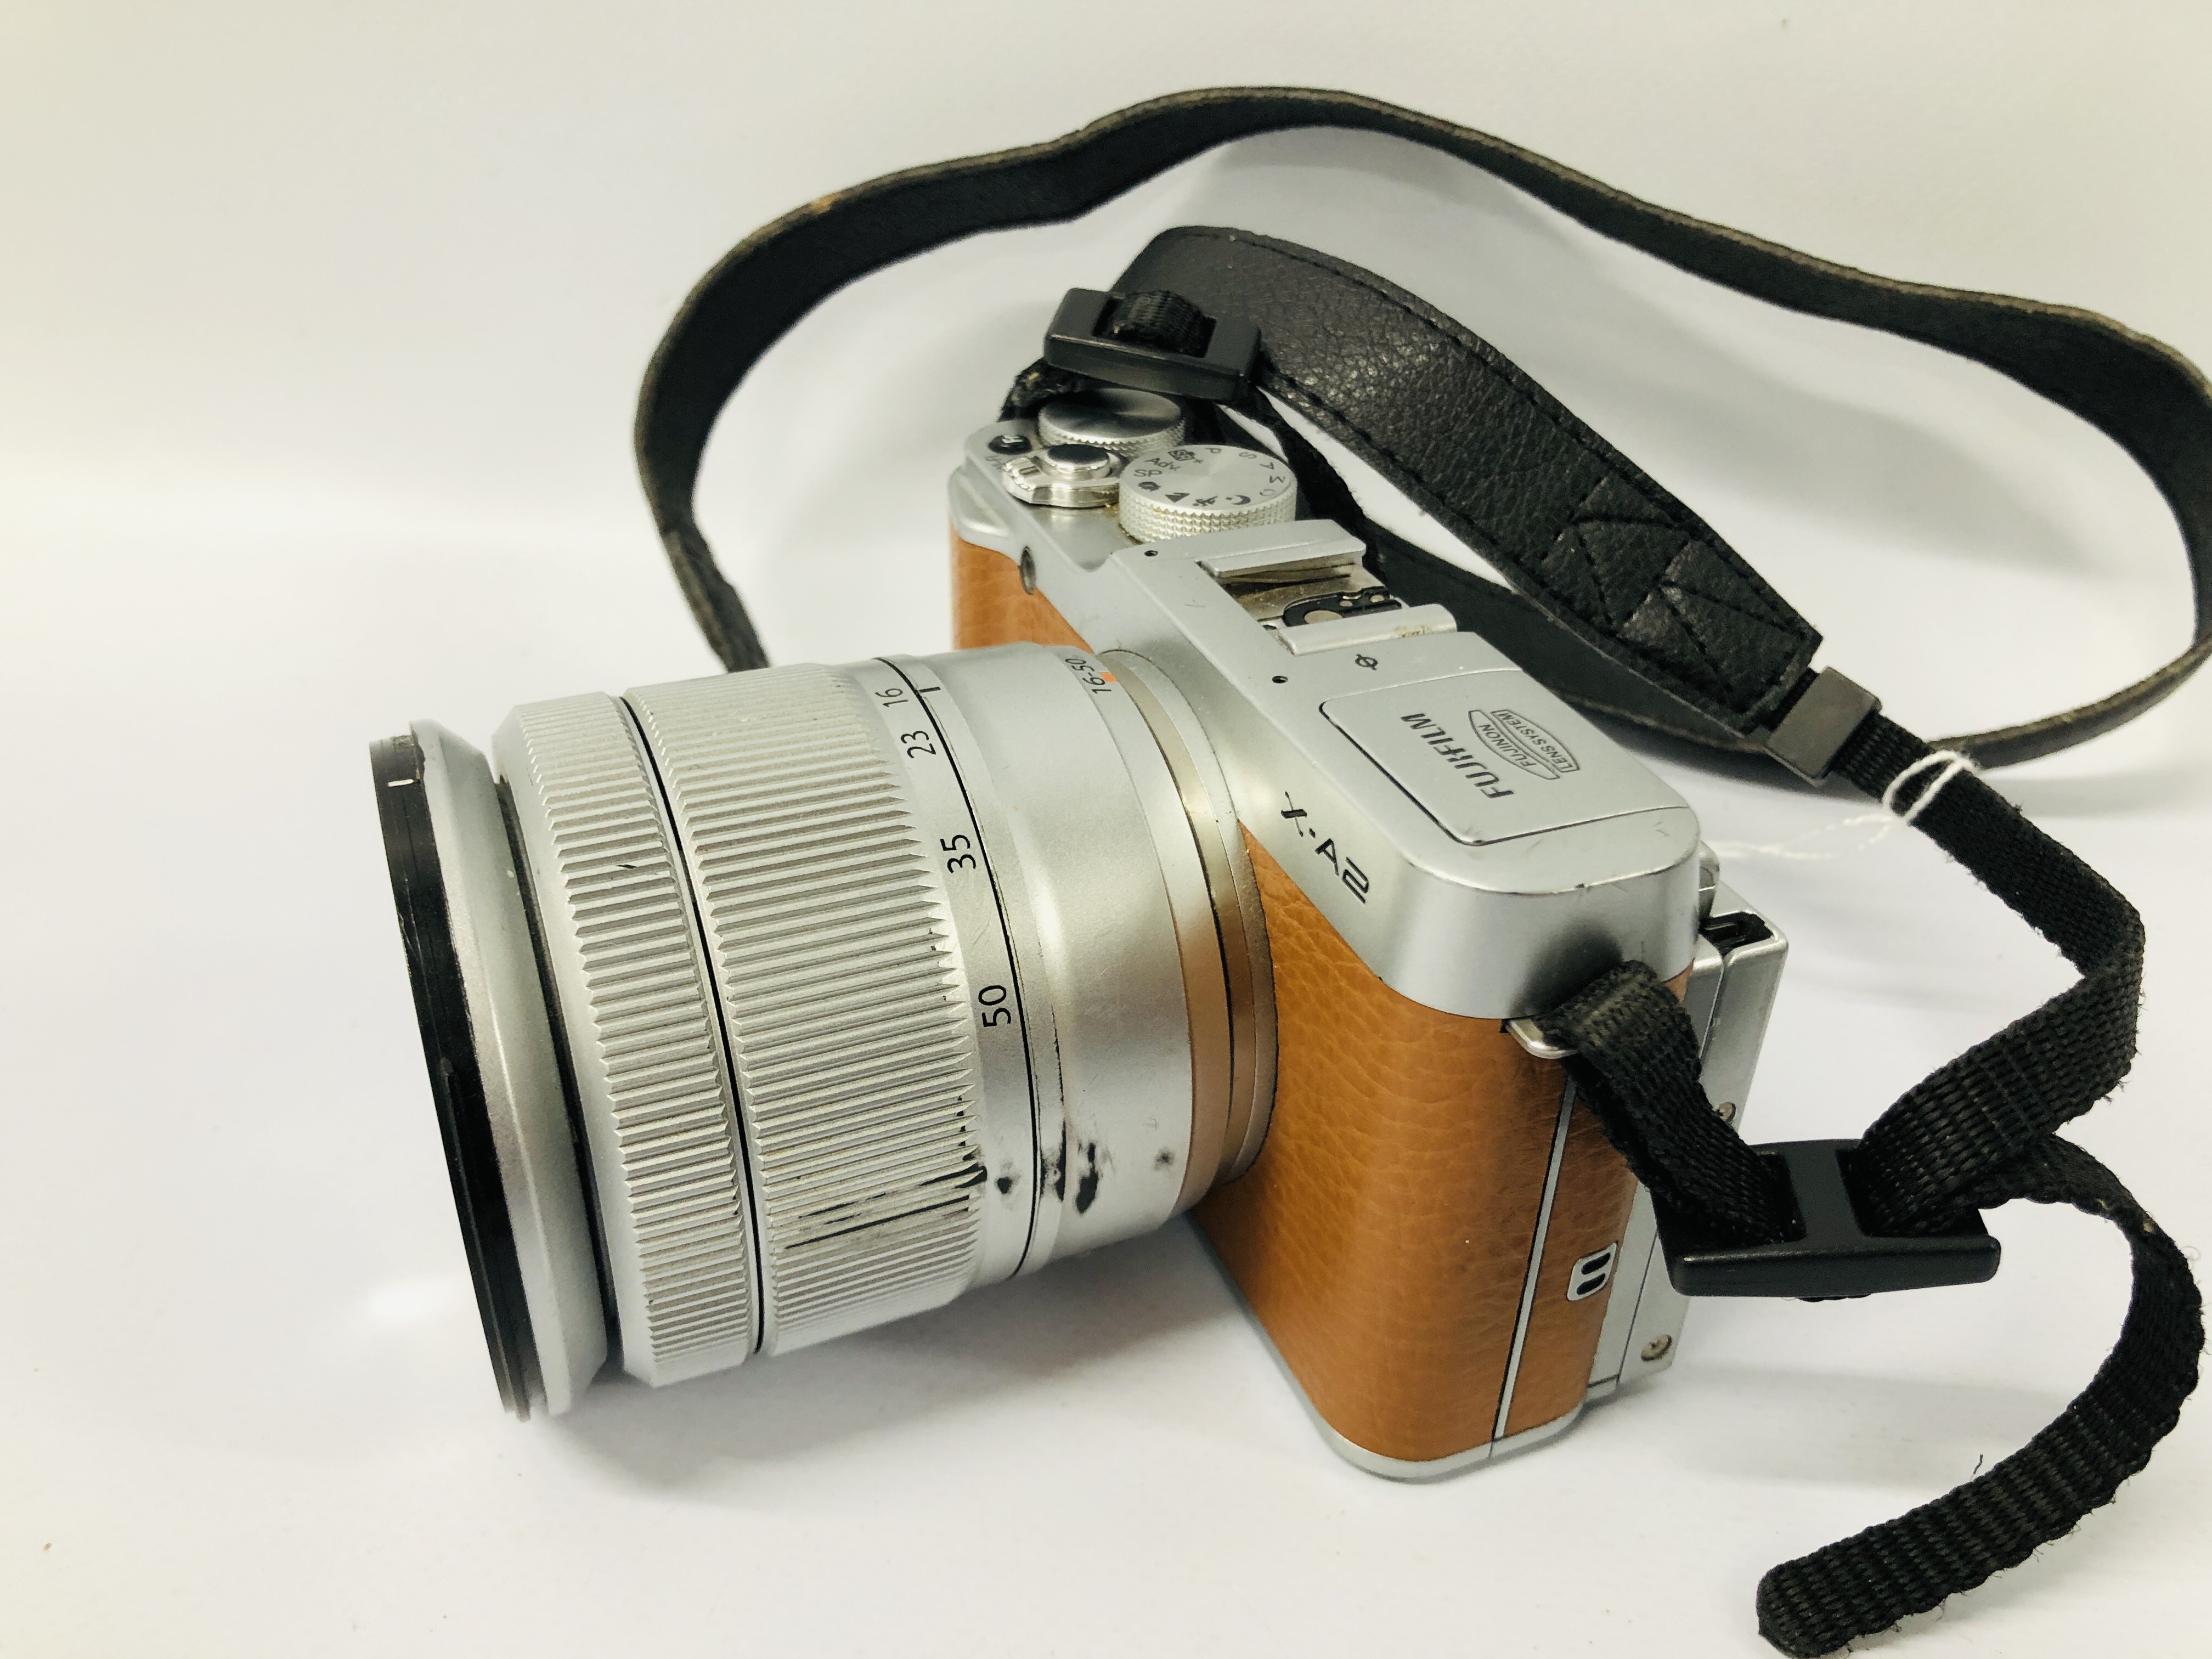 FUJIFILM X-A2 DIGITAL CAMERA FITTED WITH FUJIFILM XC 16-50 MM LENS (NO BATTERY) S/N 55L04338 - SOLD - Image 3 of 5